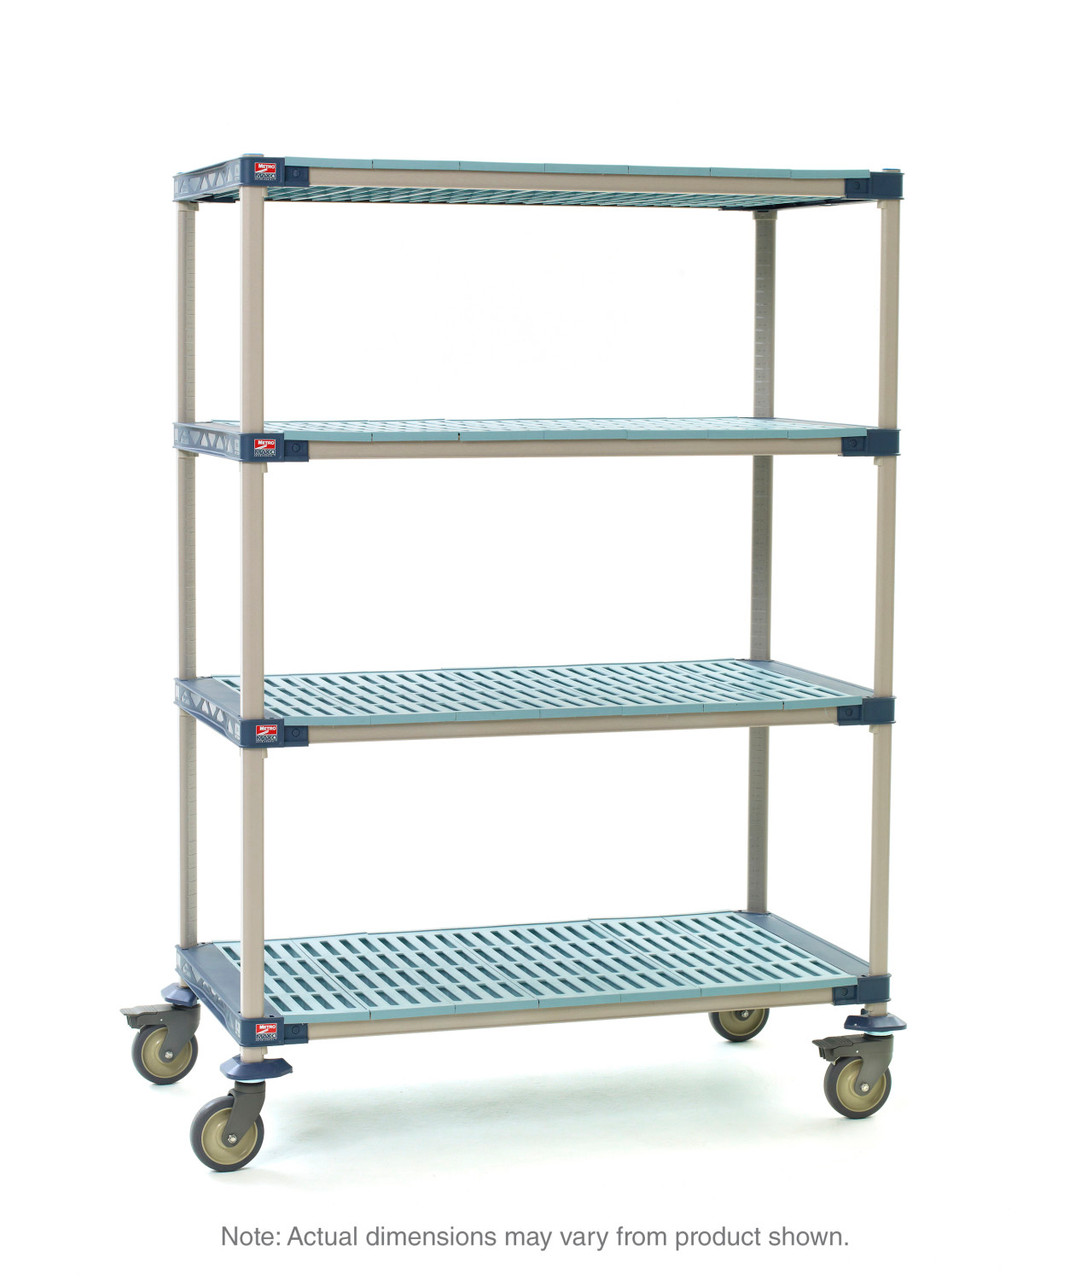 Metro 8 Light Duty Shelf Divider for Industrial Wire and Plastic